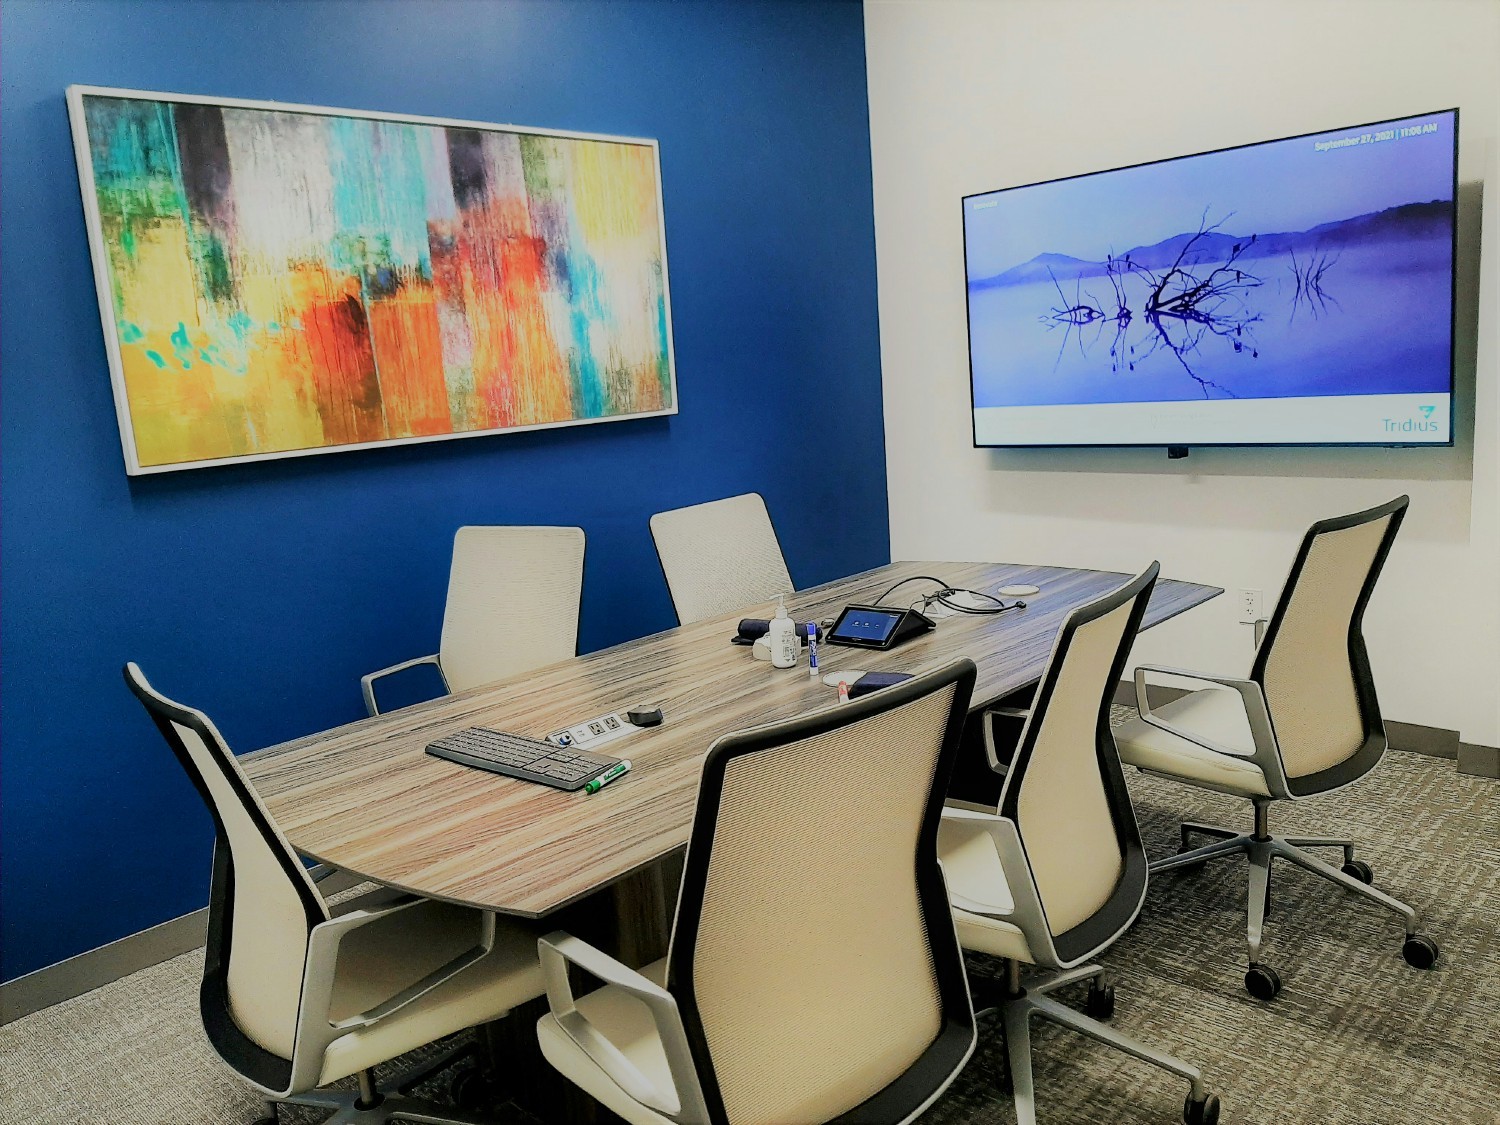 Tridius Technologies office space in the Plano, TX headquarters.